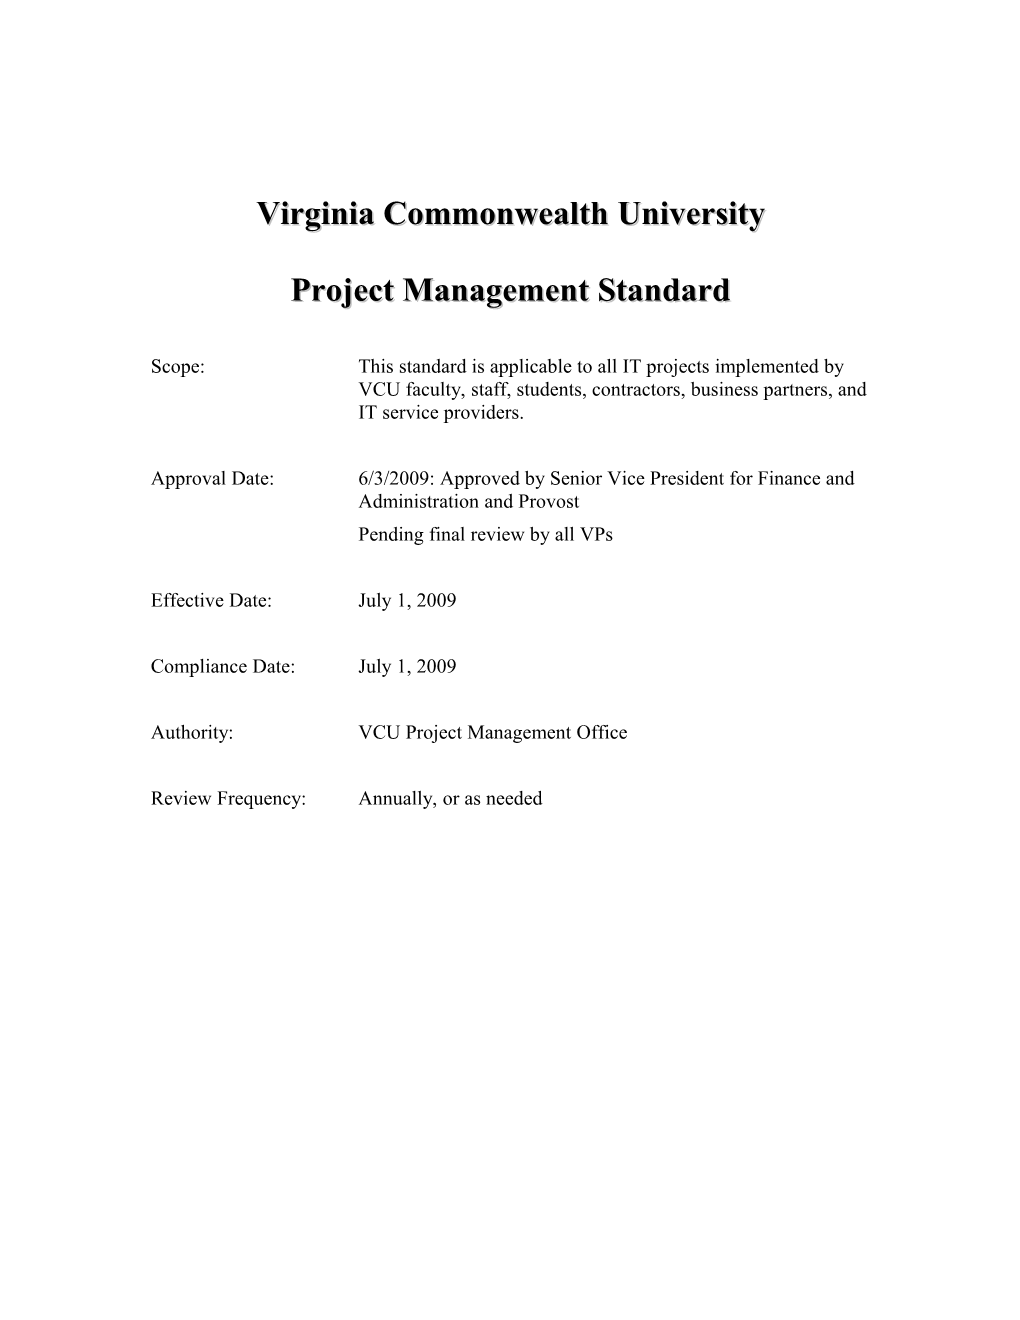 Virginia Commonwealth University IT Project Management Guidelines